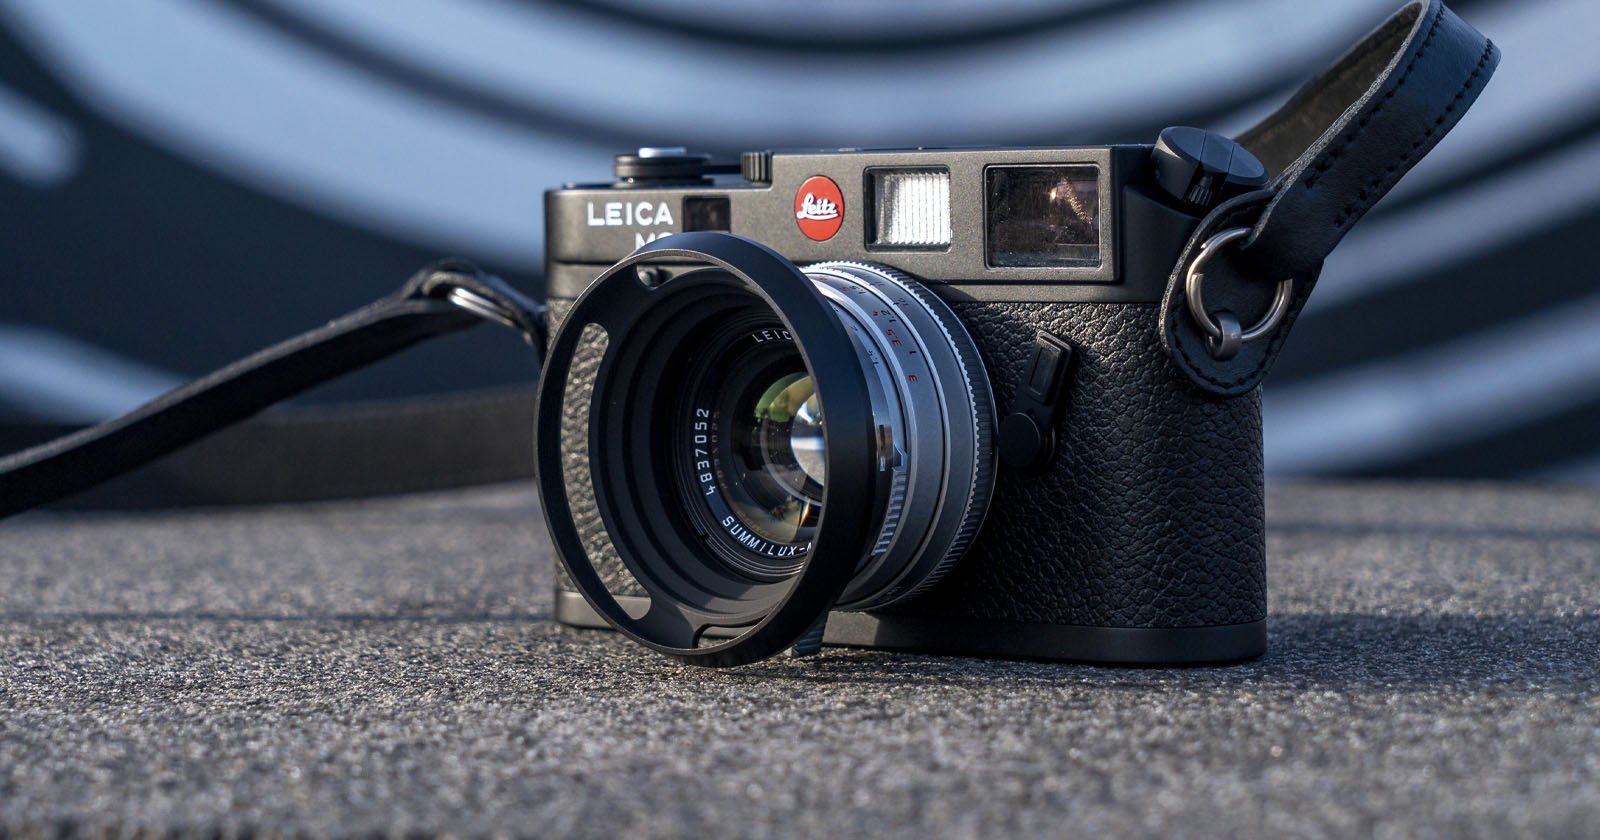 The New Leica M6 - Hot Or Not? - StreetShootr